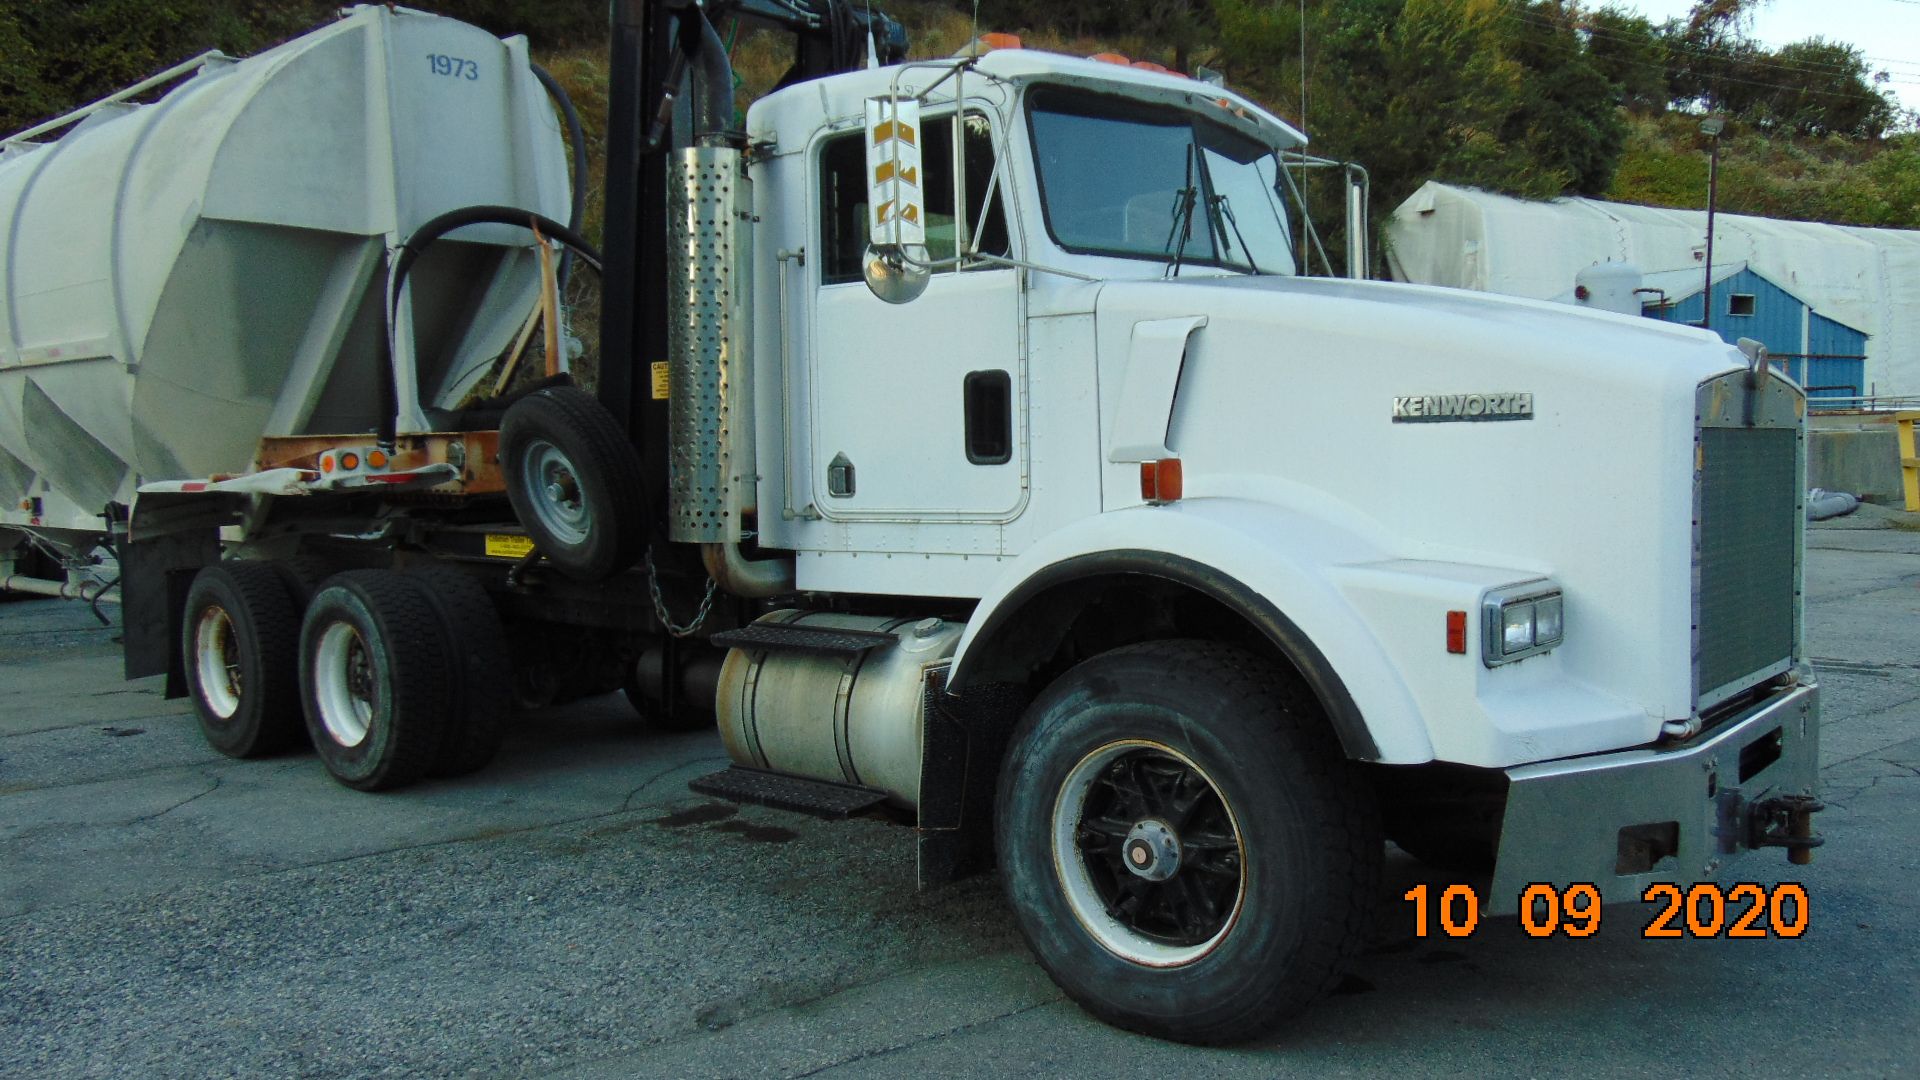 1989 Kenworth Truck Tractor, Standard Cab - Image 2 of 9